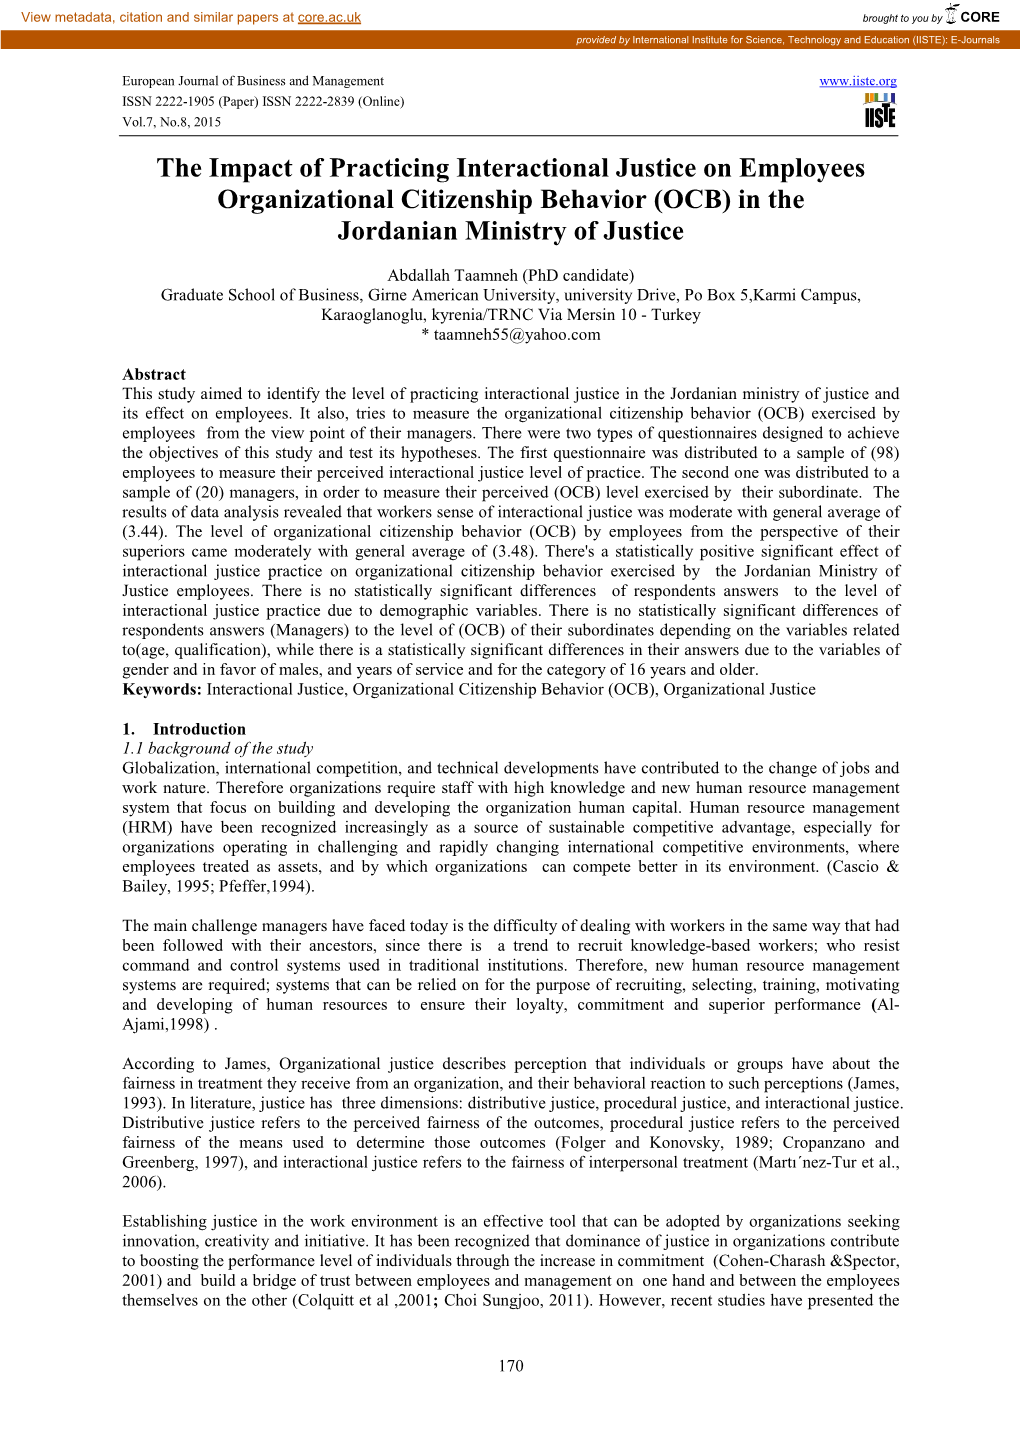 The Impact of Practicing Interactional Justice on Employees Organizational Citizenship Behavior (OCB) in the Jordanian Ministry of Justice